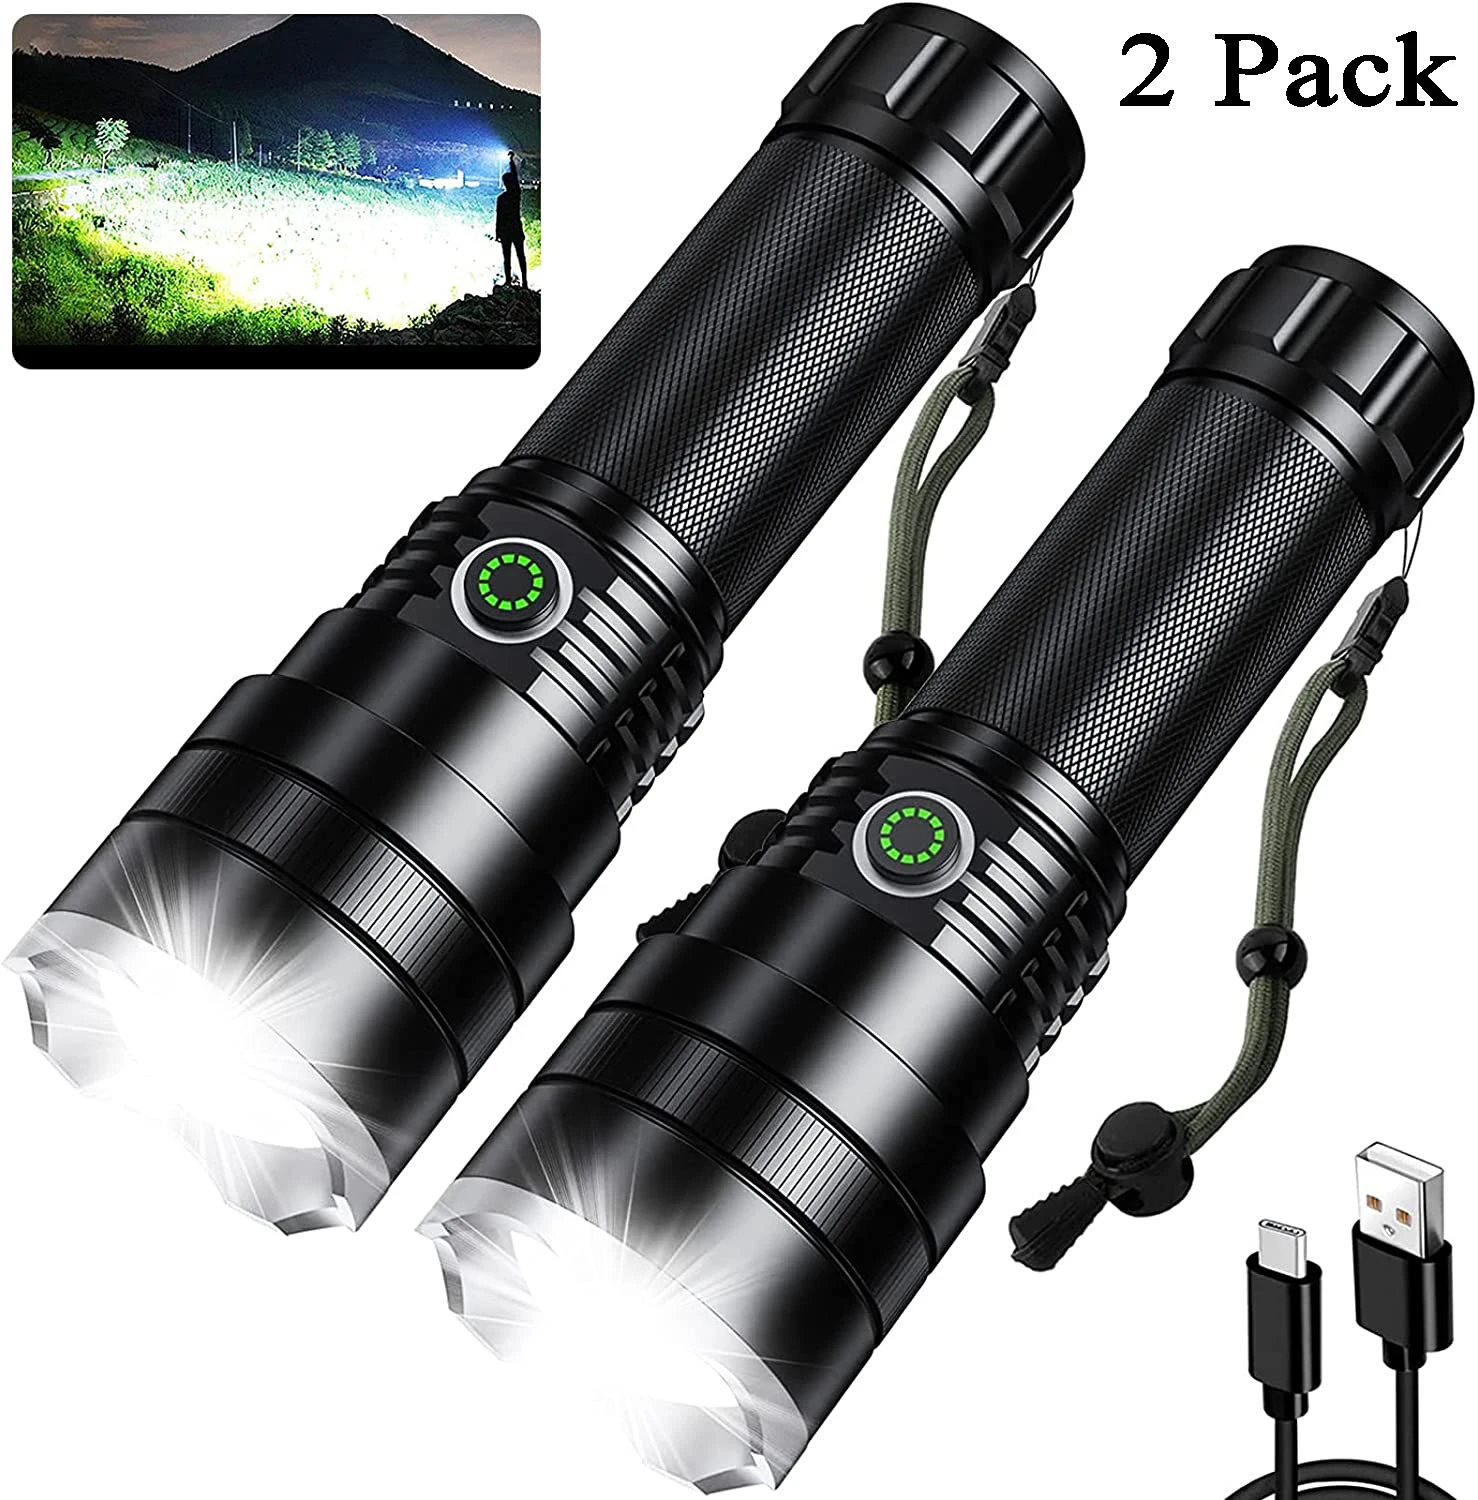 

D2 2 Pack Rechargeable Flashlights Super Bright Led Tactical Flashlight 4 Modes Zoomable Powerful Handheld EDC Flash Light Torch